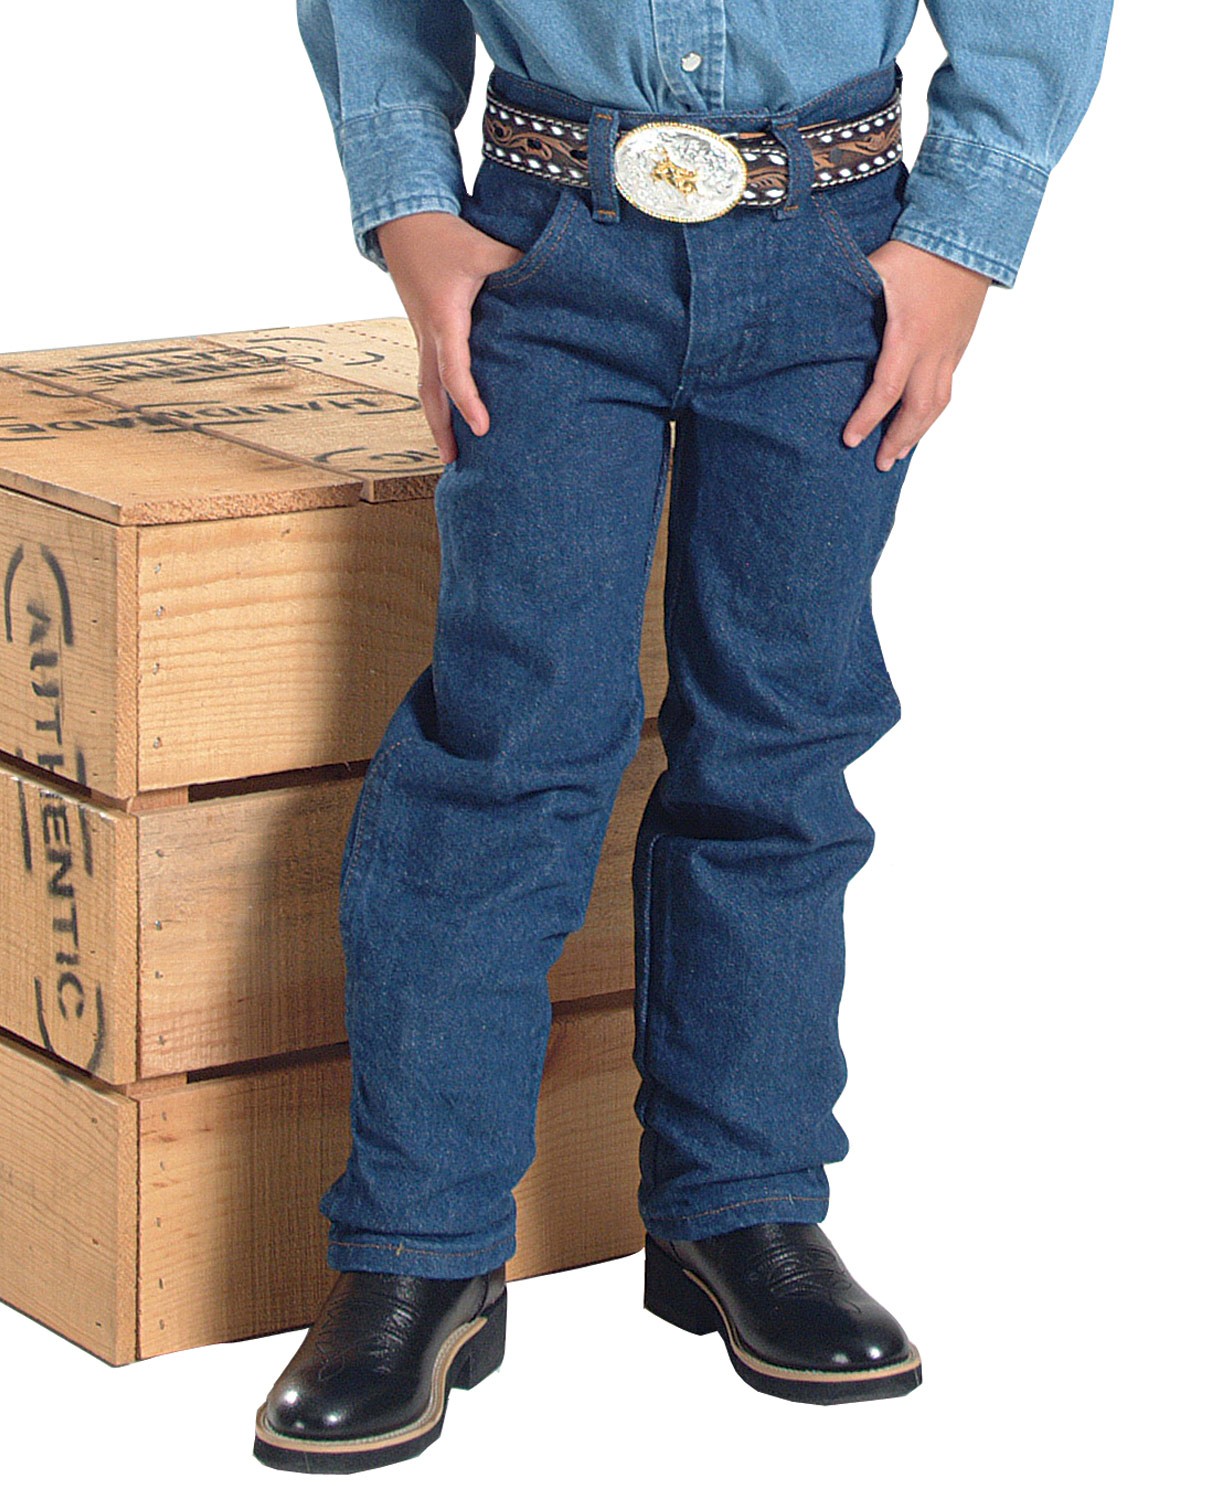 Pro Rodeo 13MWZ Jeans - Regular and Slim - and Child Sizes - Fort Brands